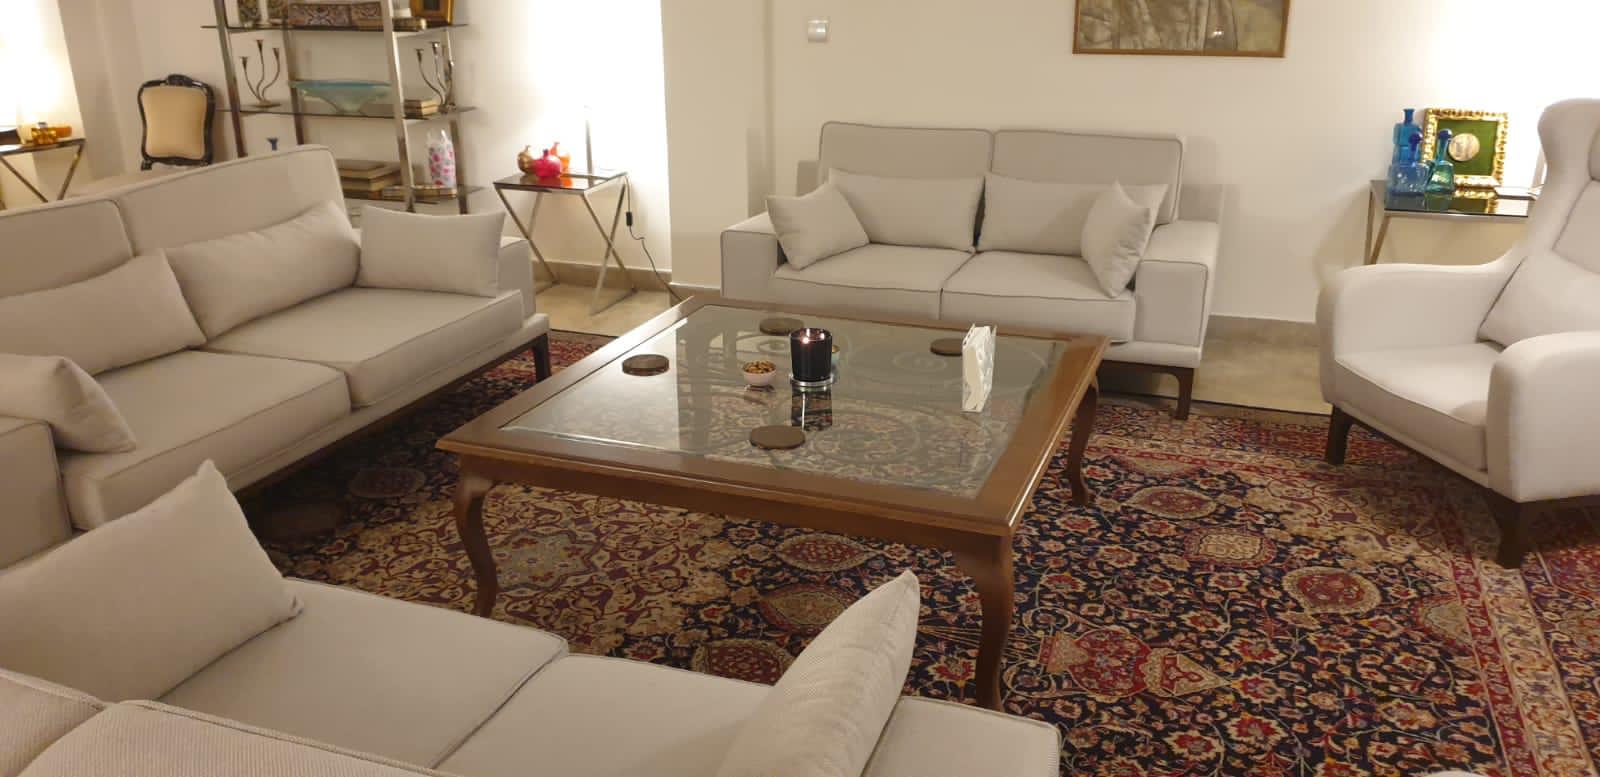 This Fully Furnished Flat for Renting in Darrous Tehran